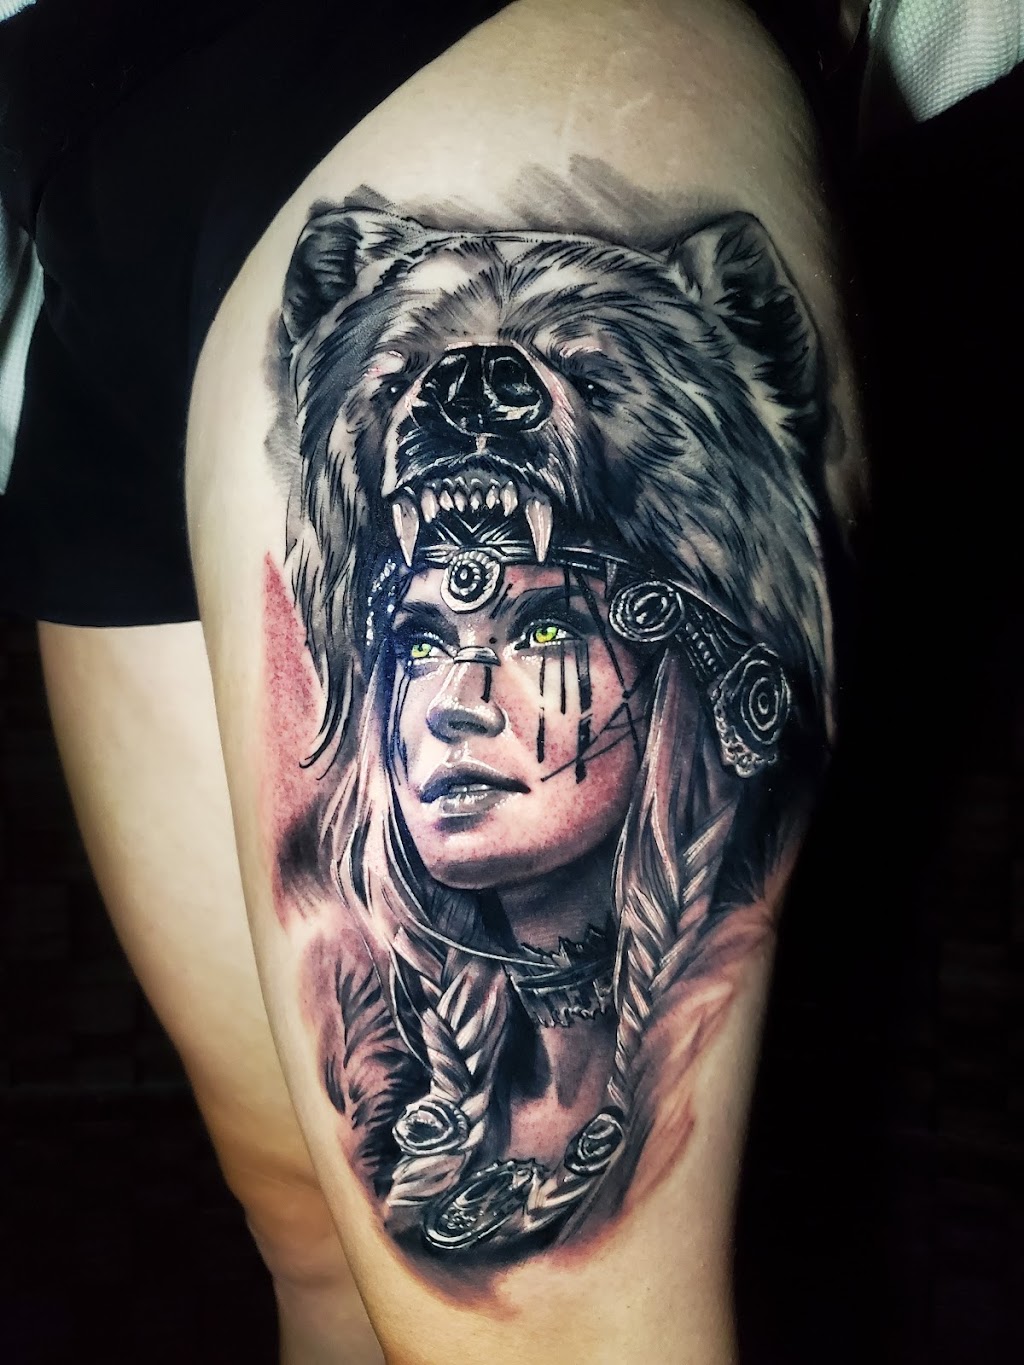 Coven Tattoo | 9100 W 100th Ave #5b, Westminster, CO 80021, USA | Phone: (720) 825-7156